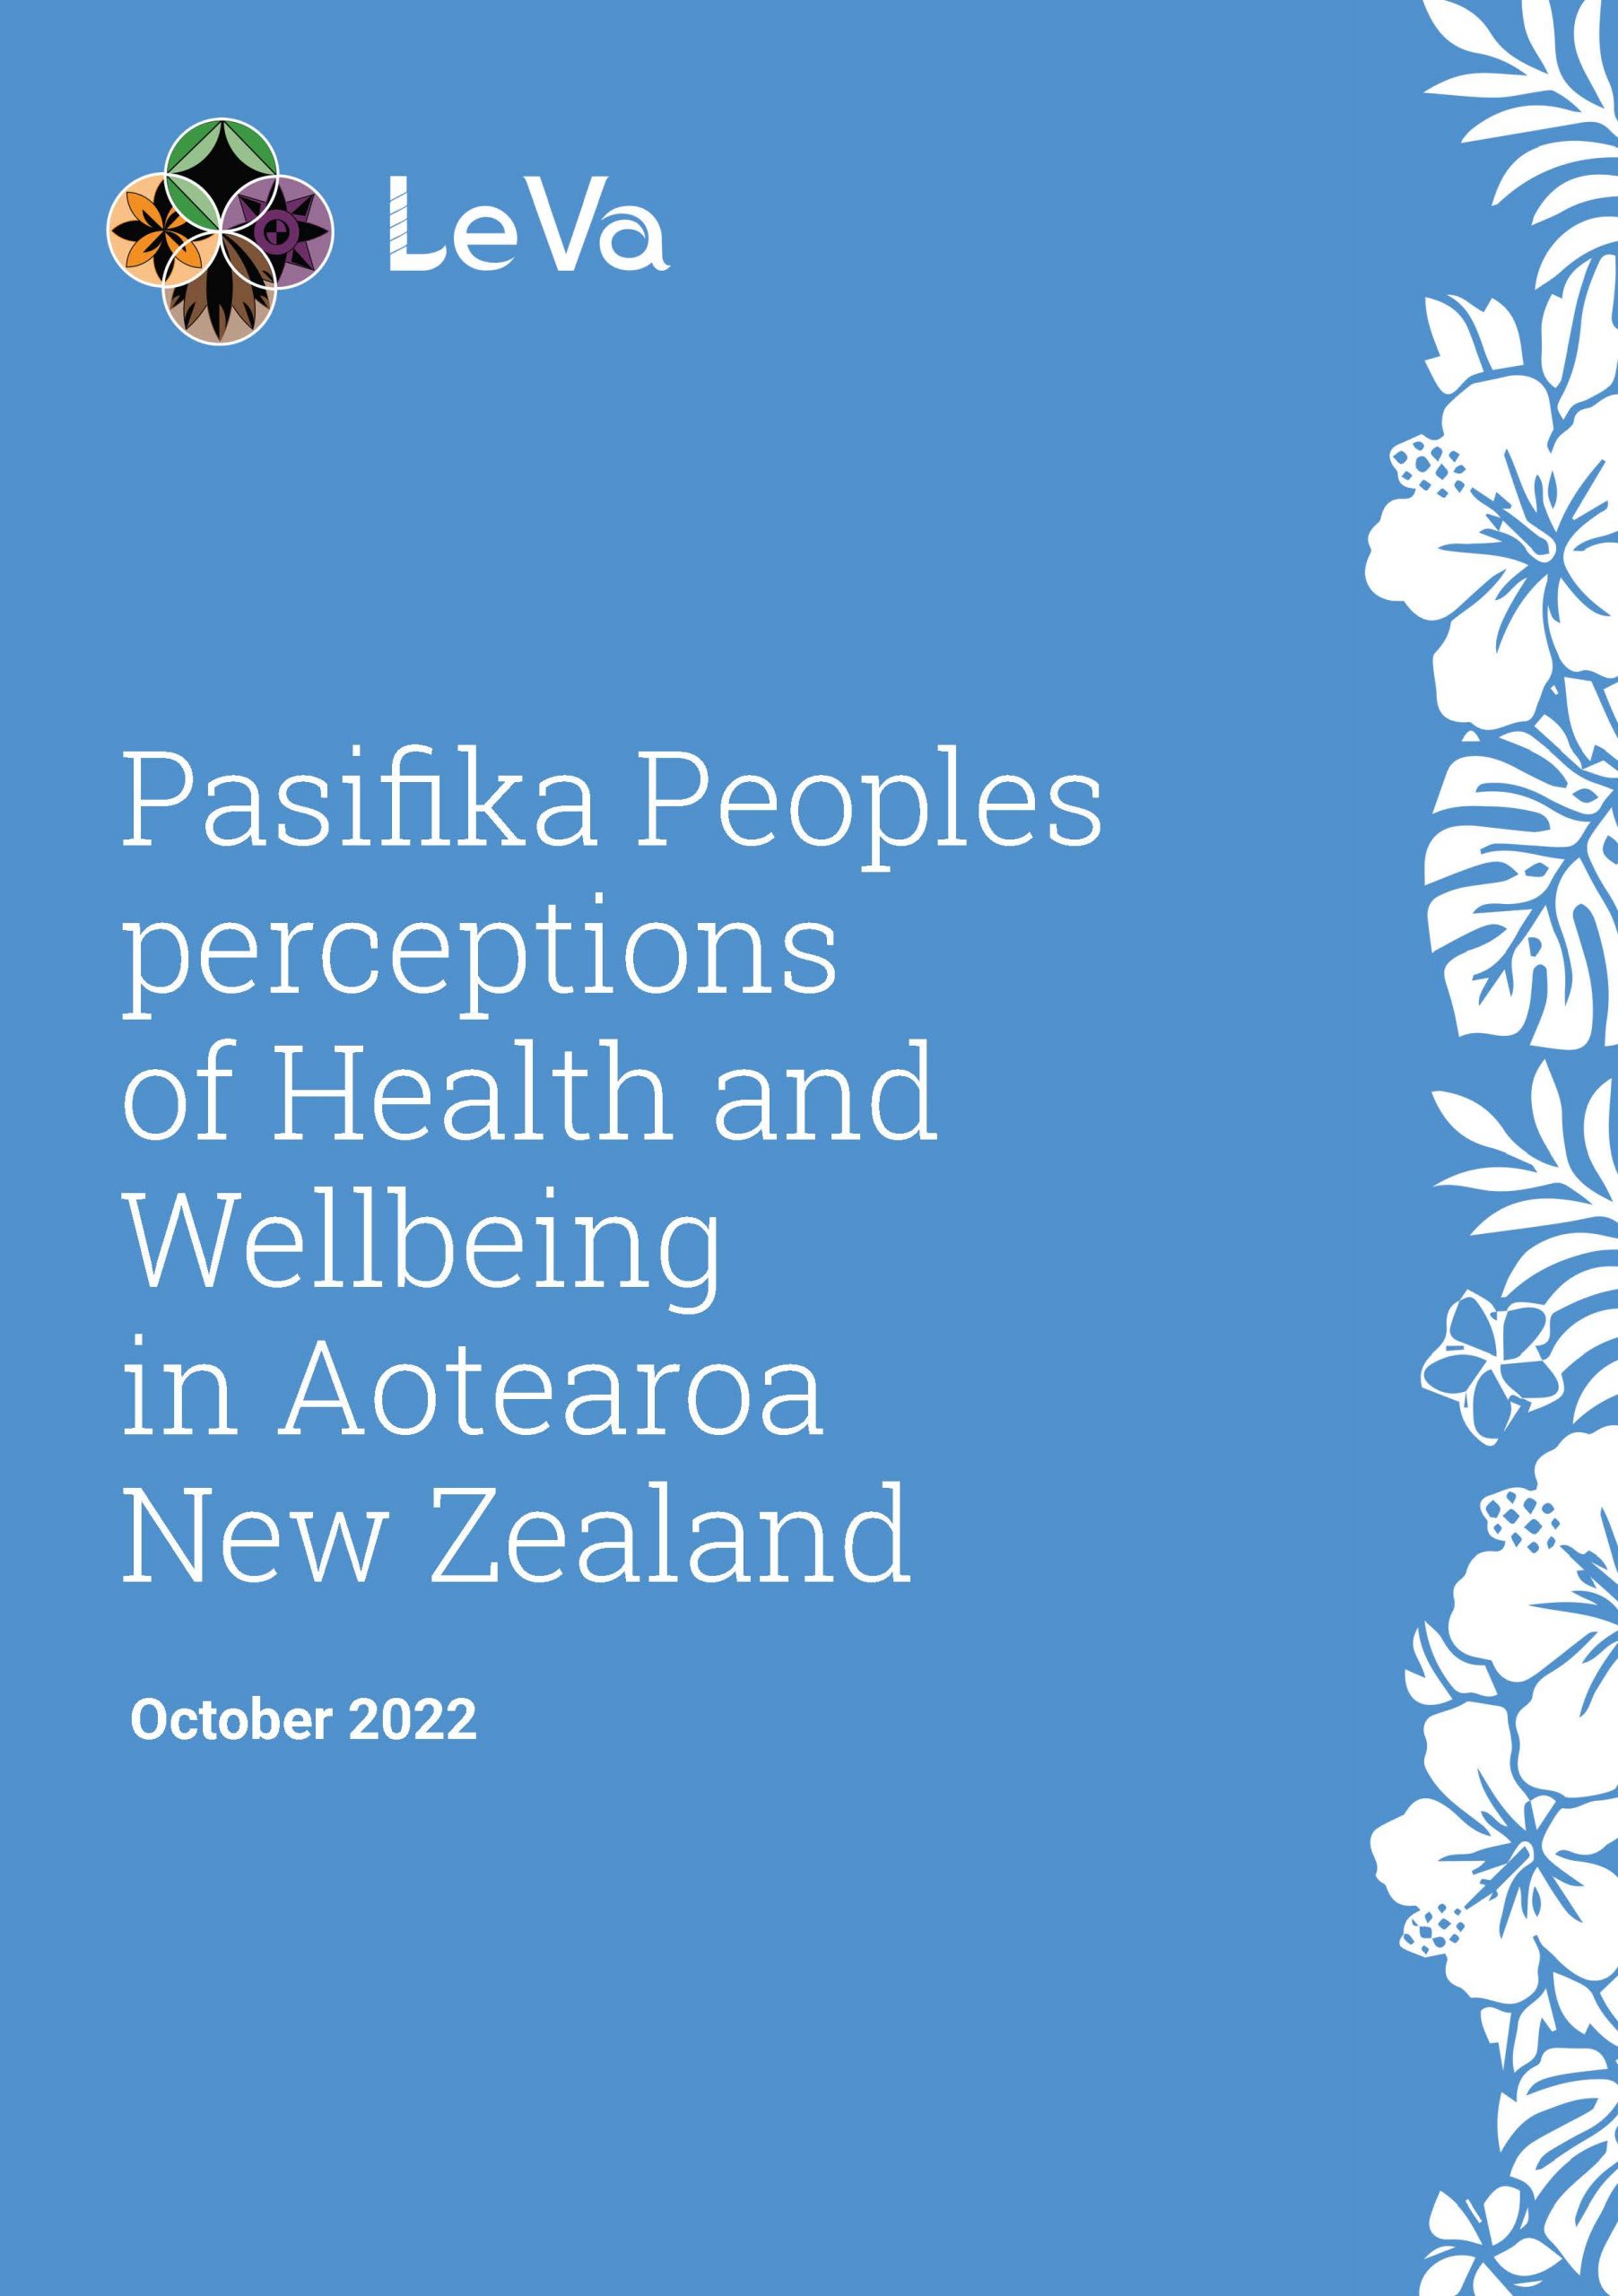 Le Va Pasifika Peoples perceptions on Health and Wellbeing cover